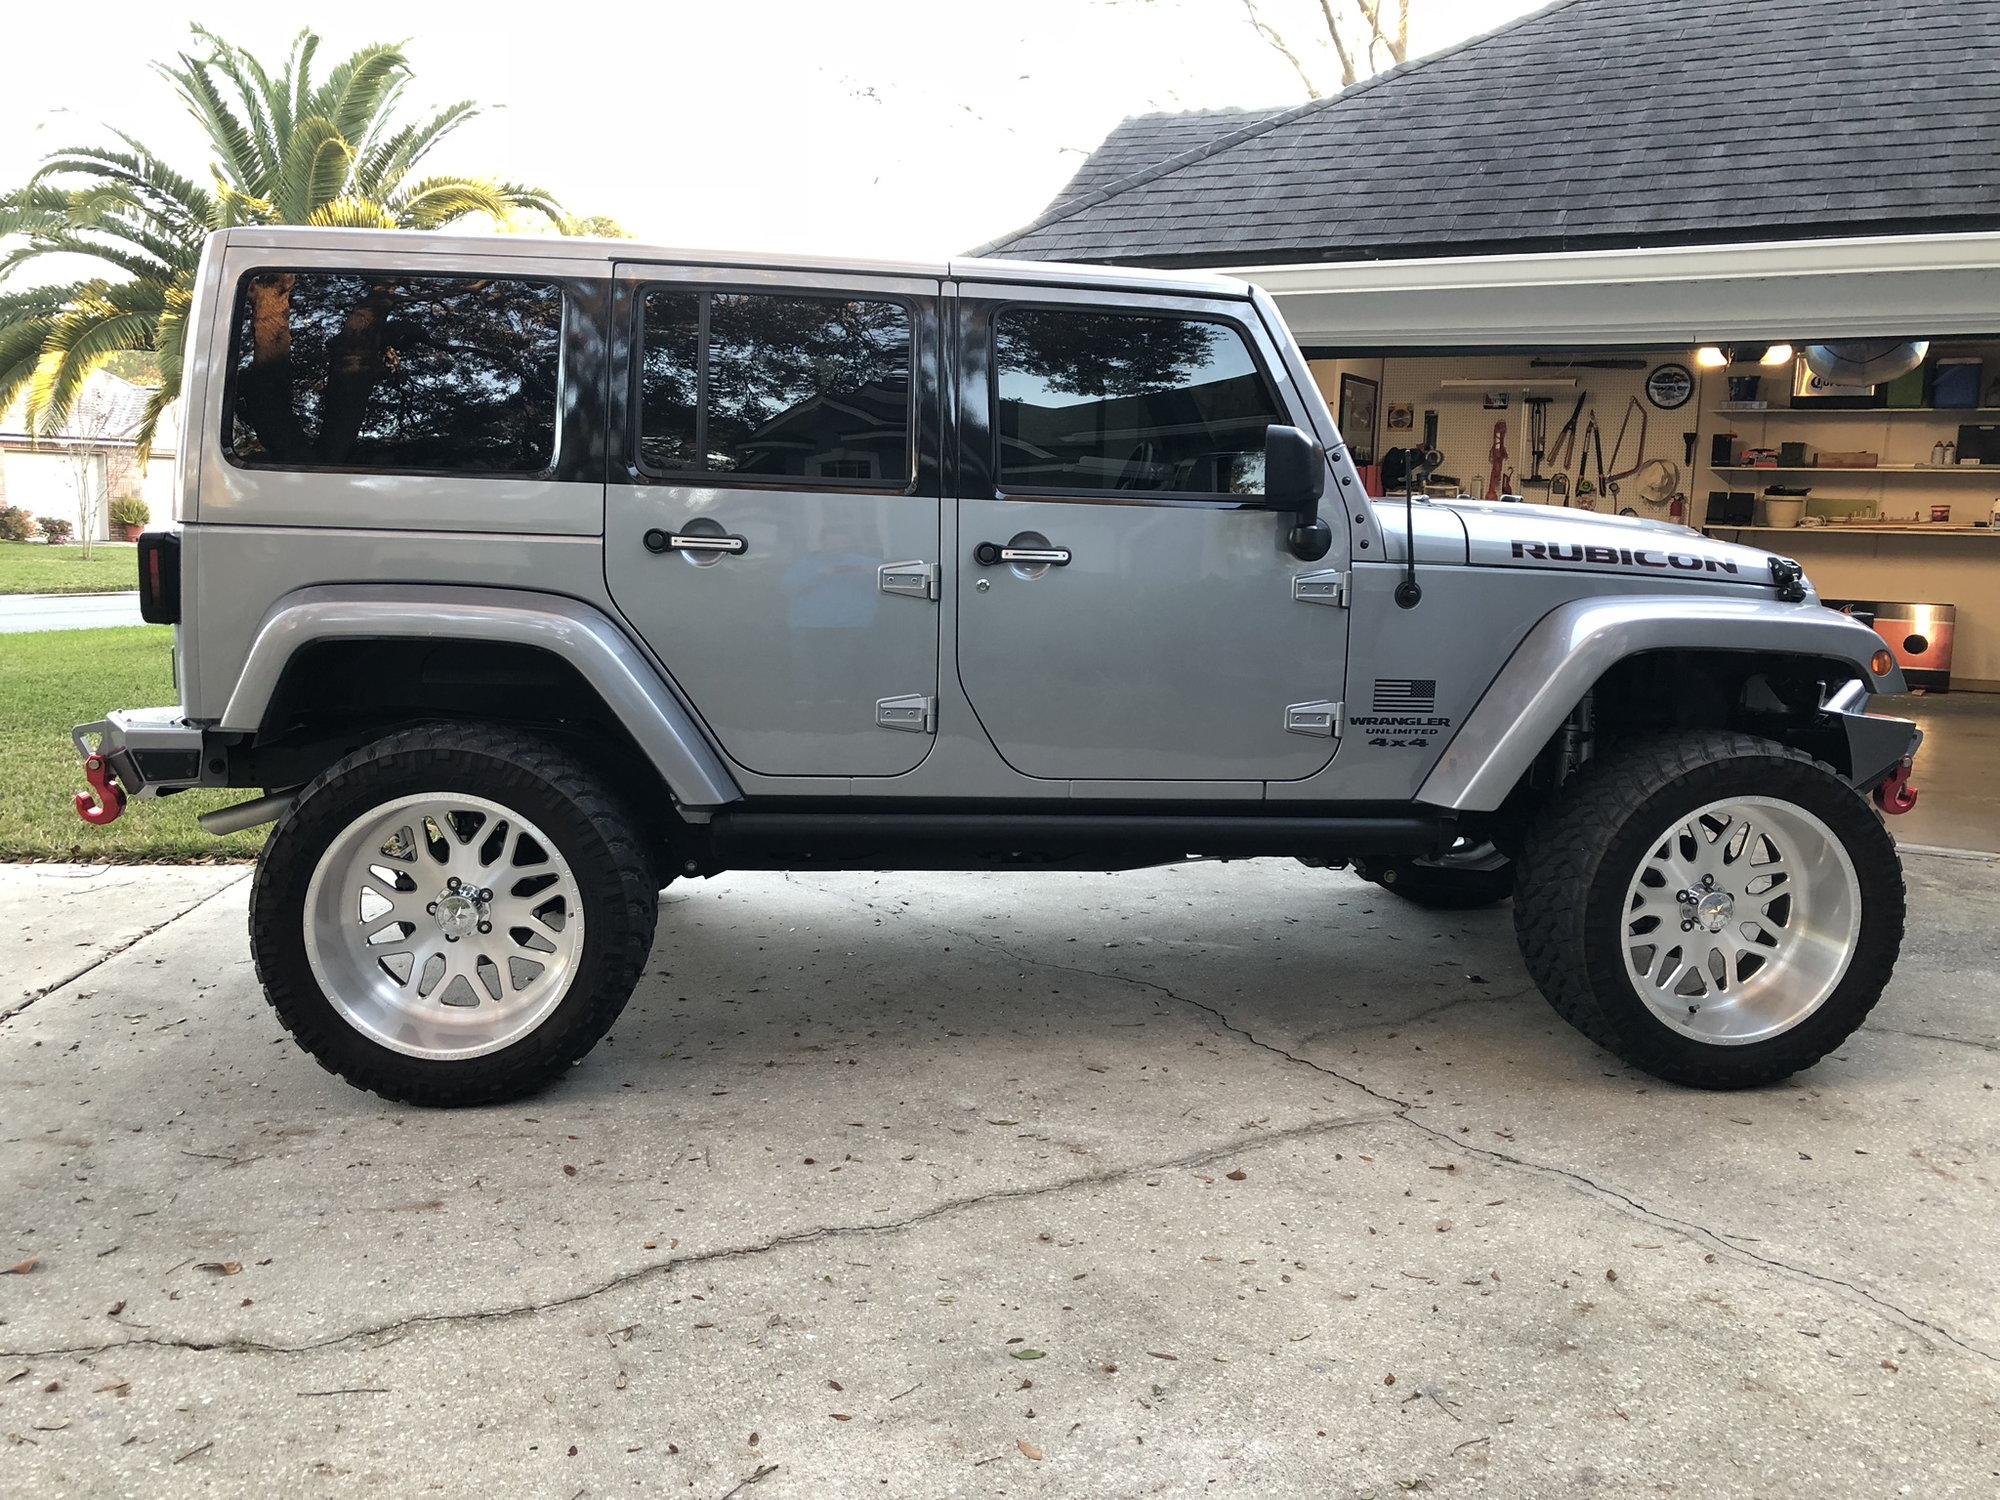 American Force Evo SS 22” on Nitto 40”  - The top destination  for Jeep JK and JL Wrangler news, rumors, and discussion